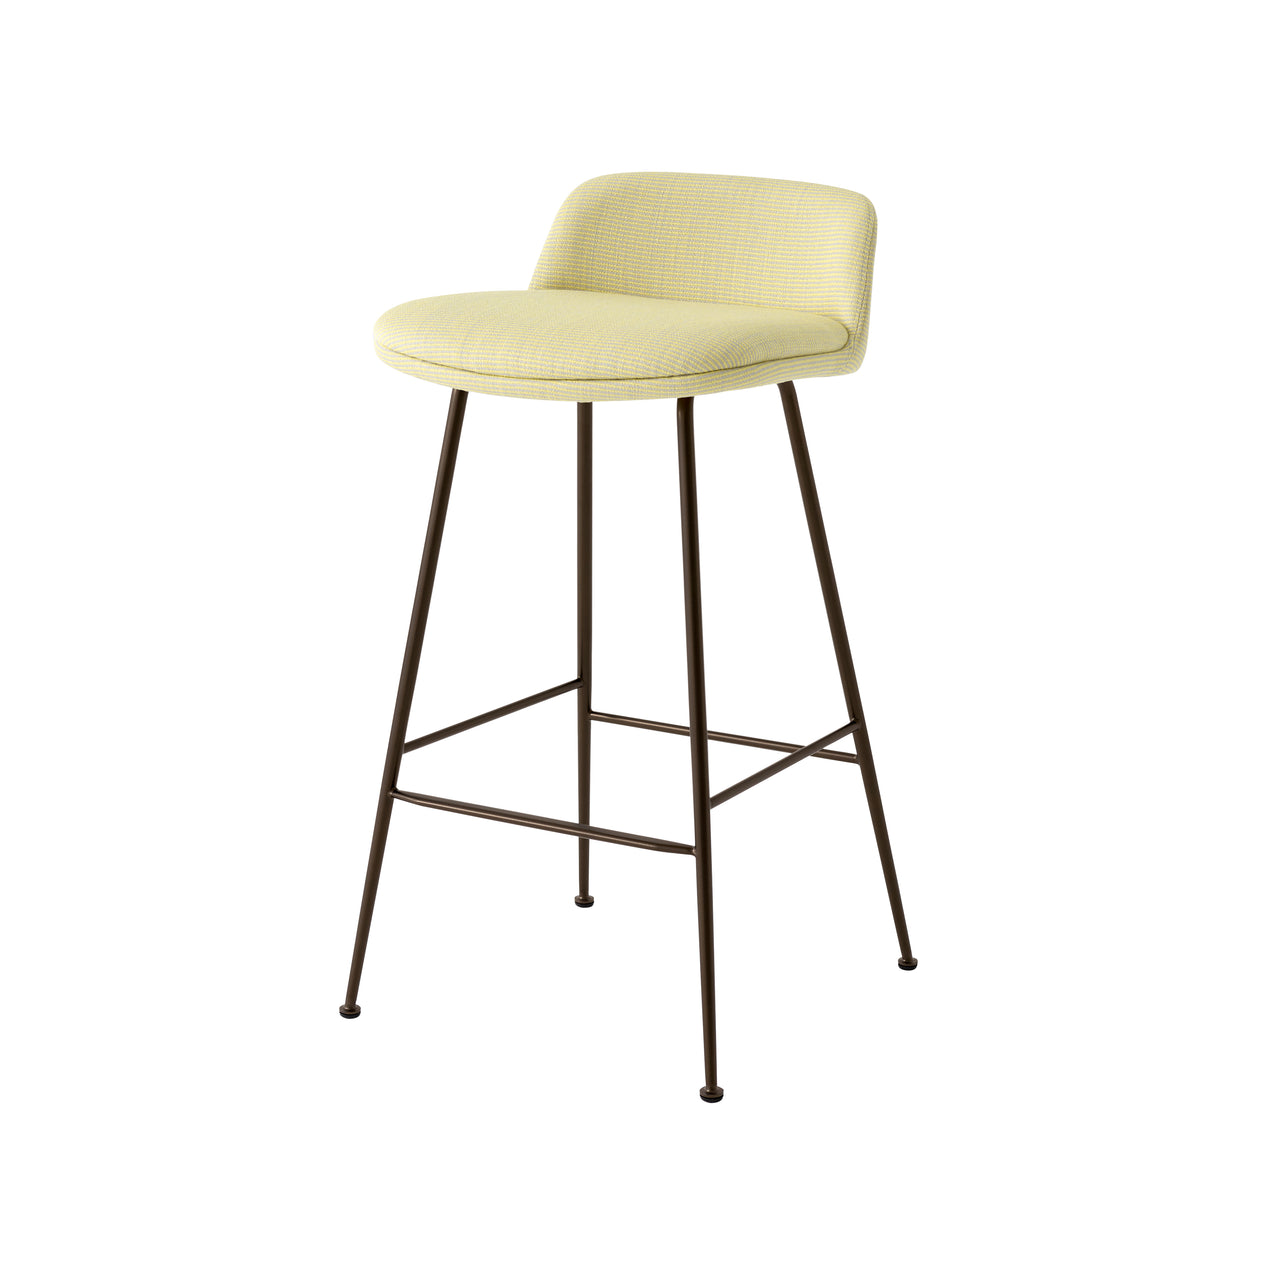 Rely Bar + Counter Stool: HW84 + HW89 + Counter (HW84) + Bronzed